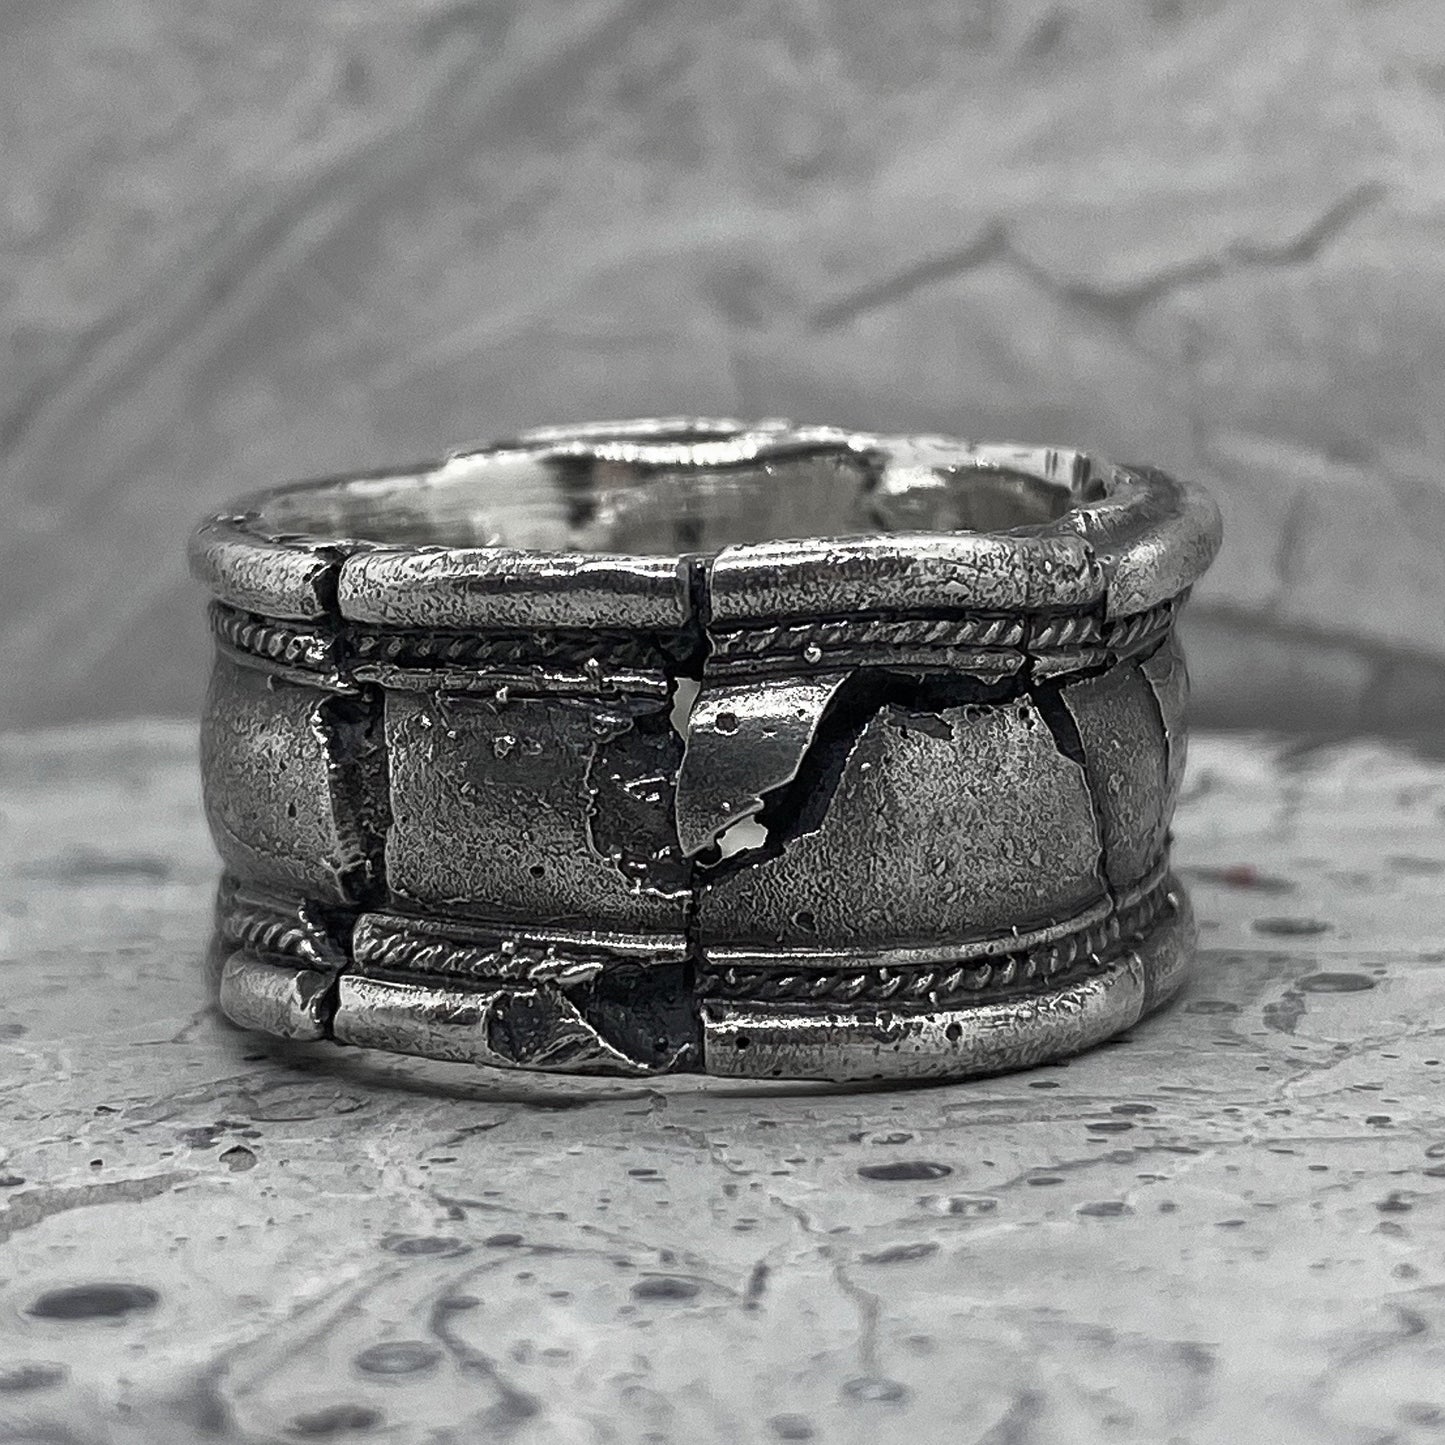 Column ring- wide ring band with cracks and breaks Unusual rings Project50g 